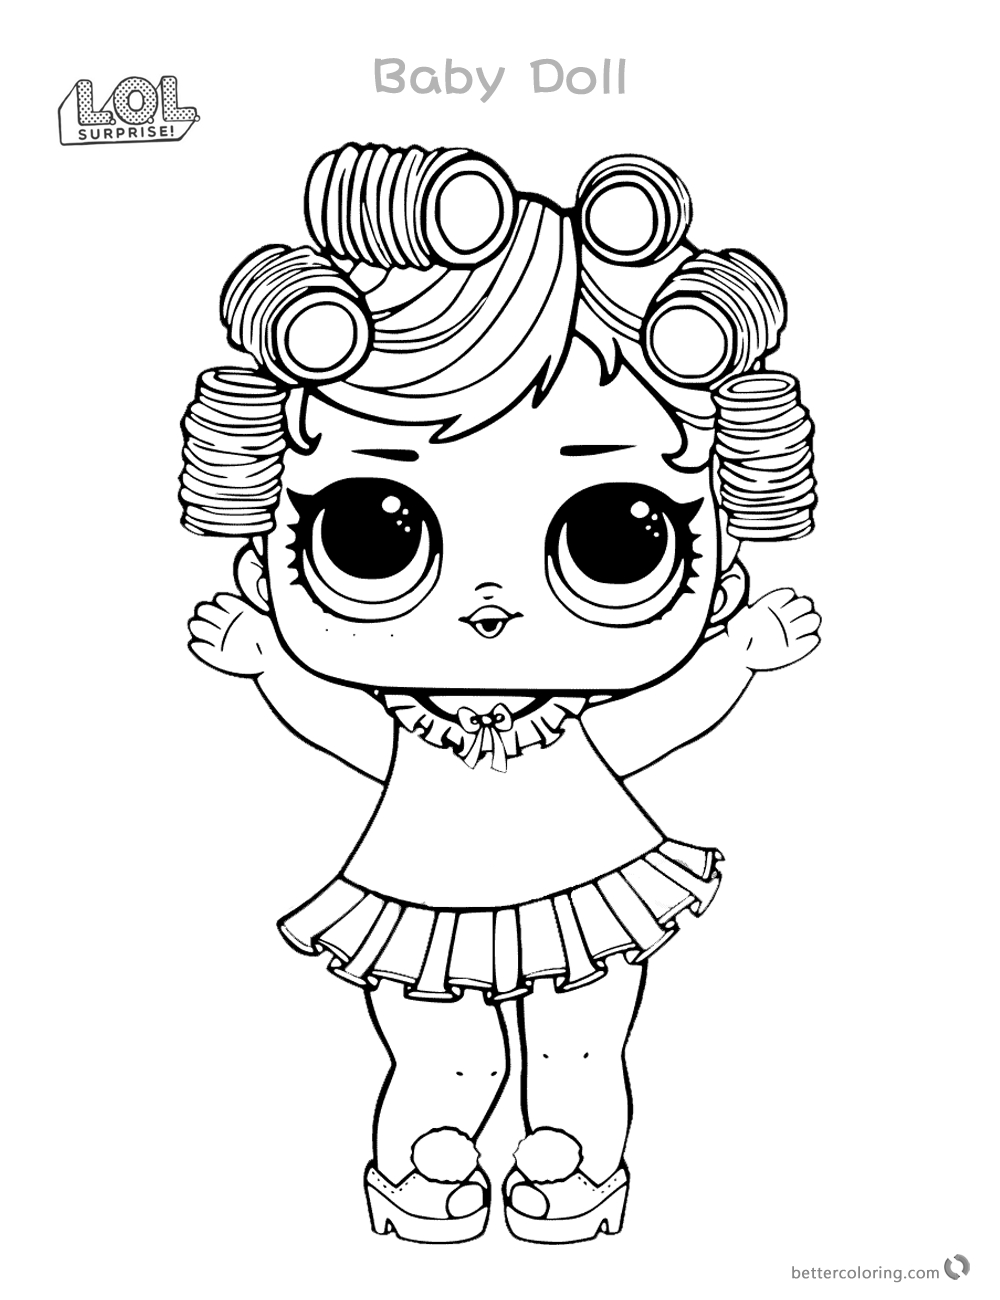 Lol Surprise Doll Coloring Pages at GetColorings.com | Free printable colorings pages to print ...